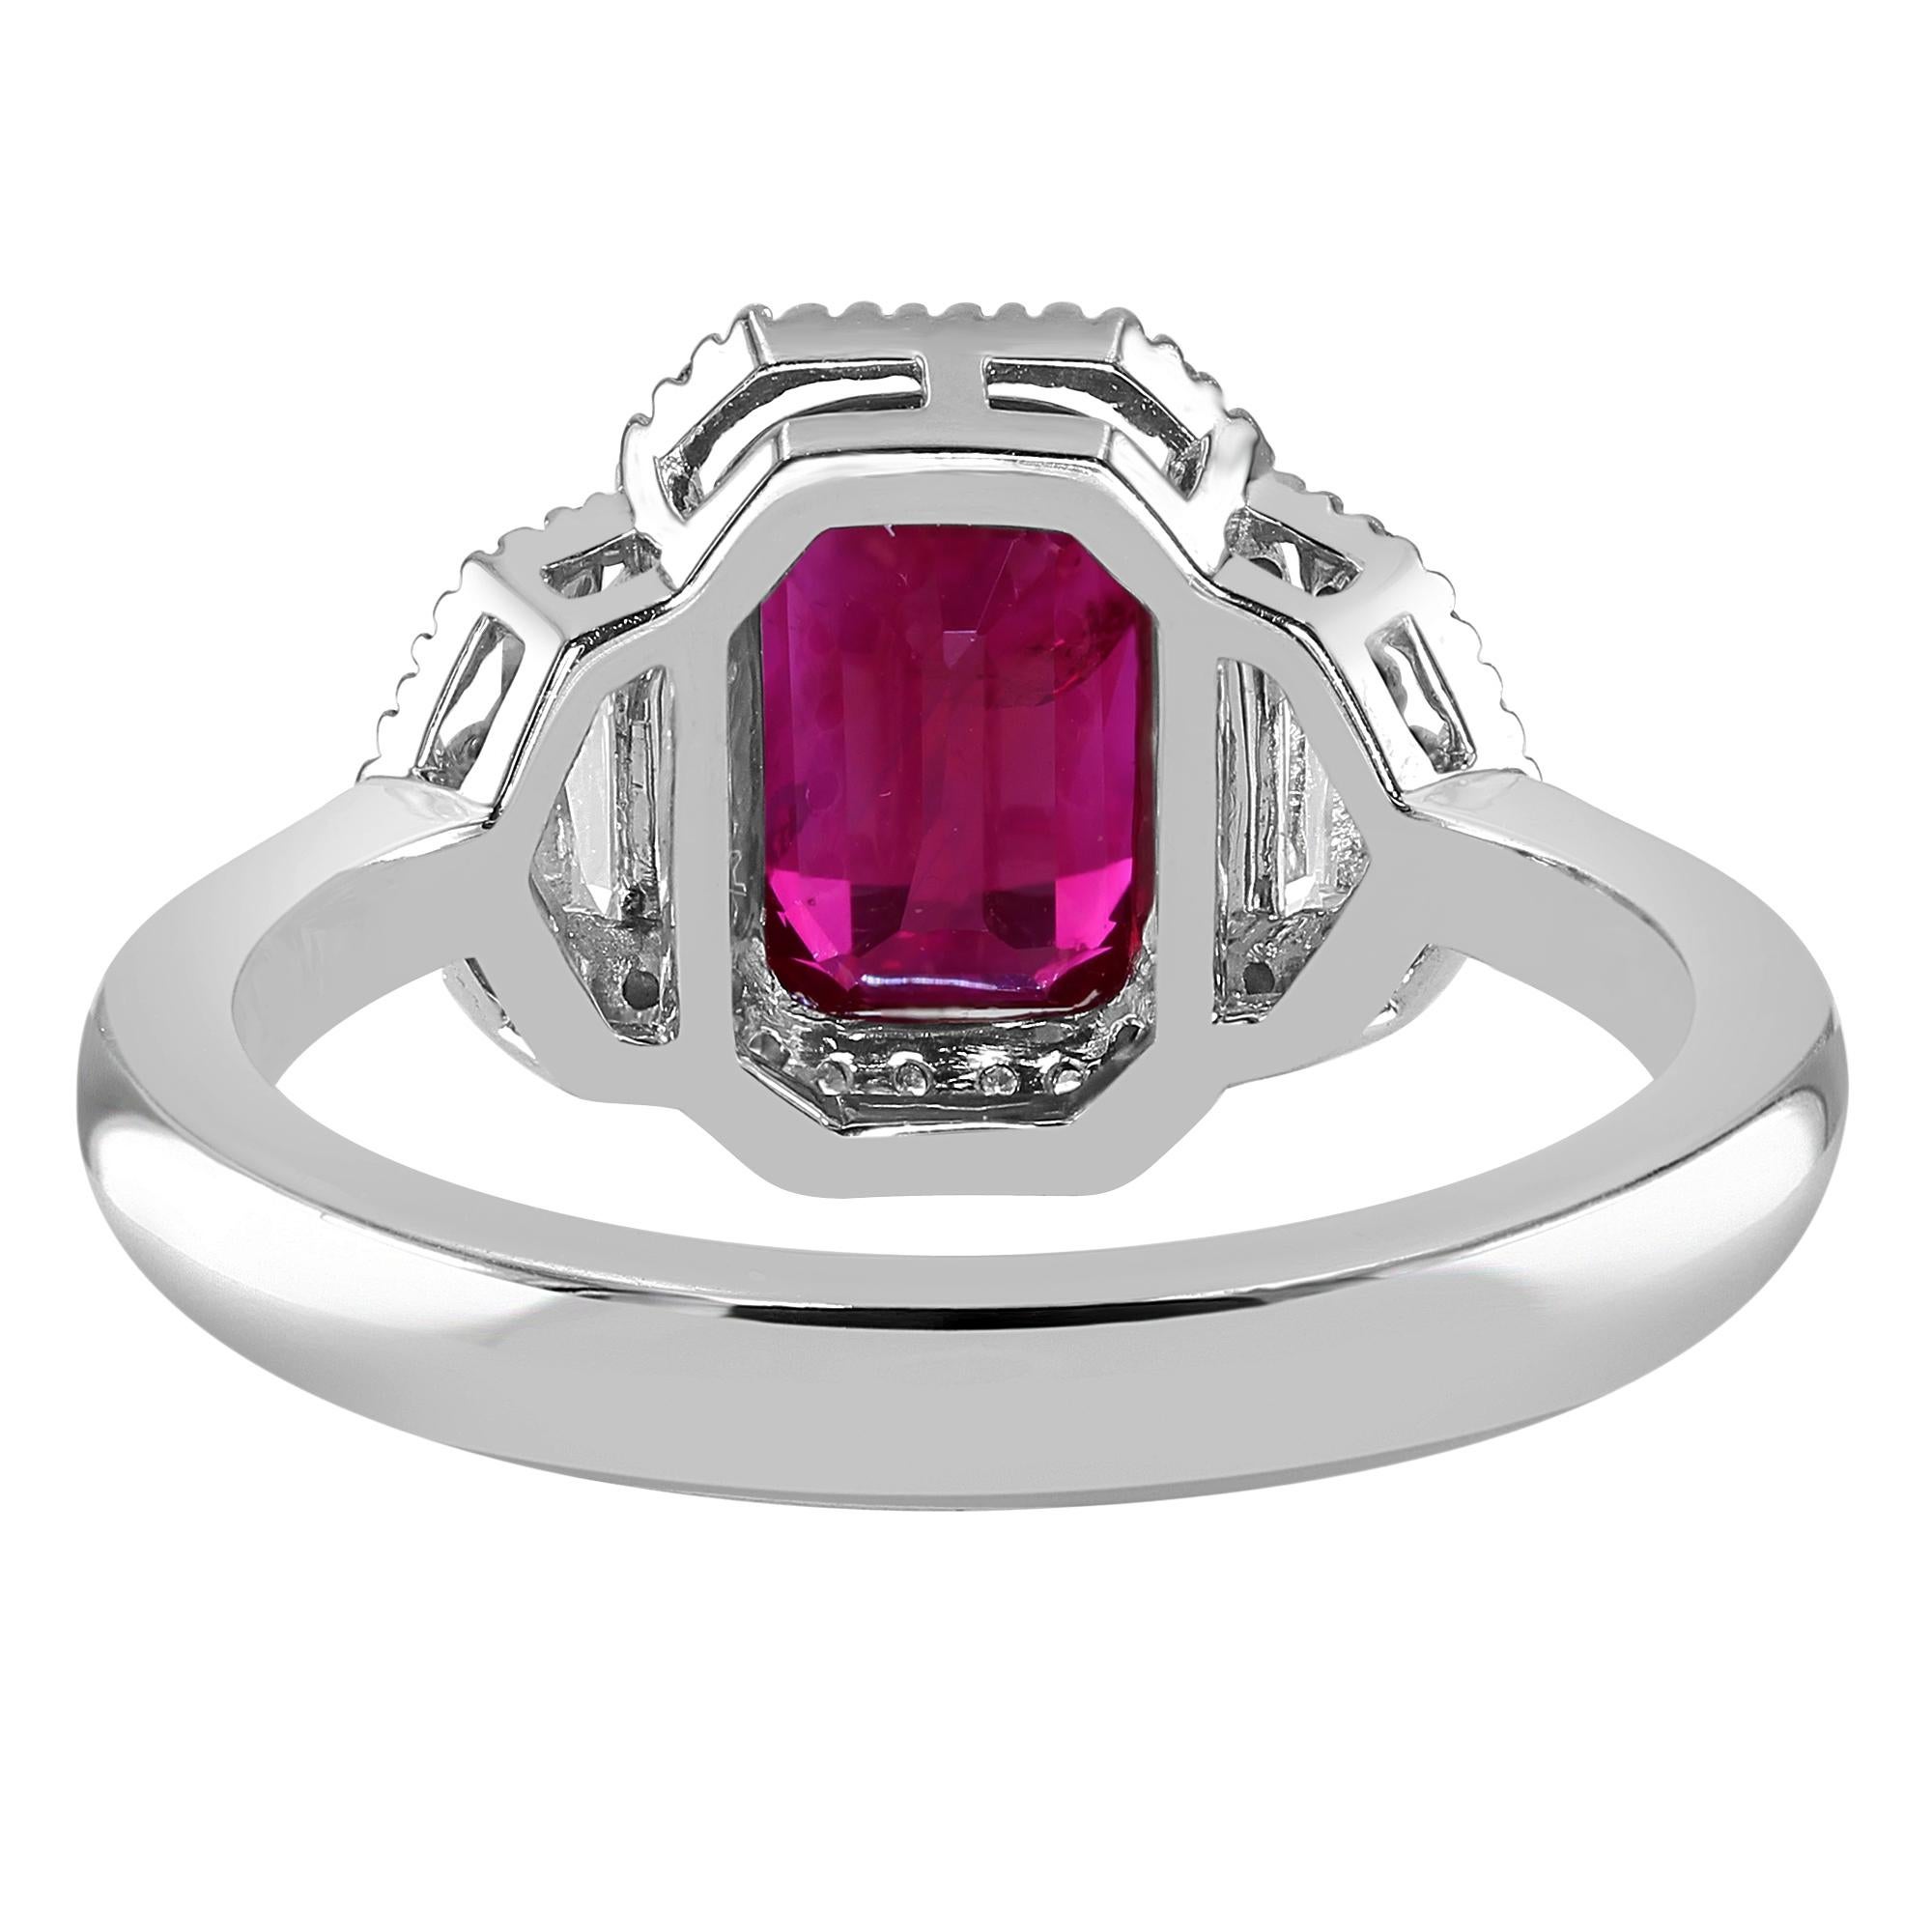 Emerald Cut 2.34 Carat Ruby and Diamond White Gold Three-Stone Ring For Sale